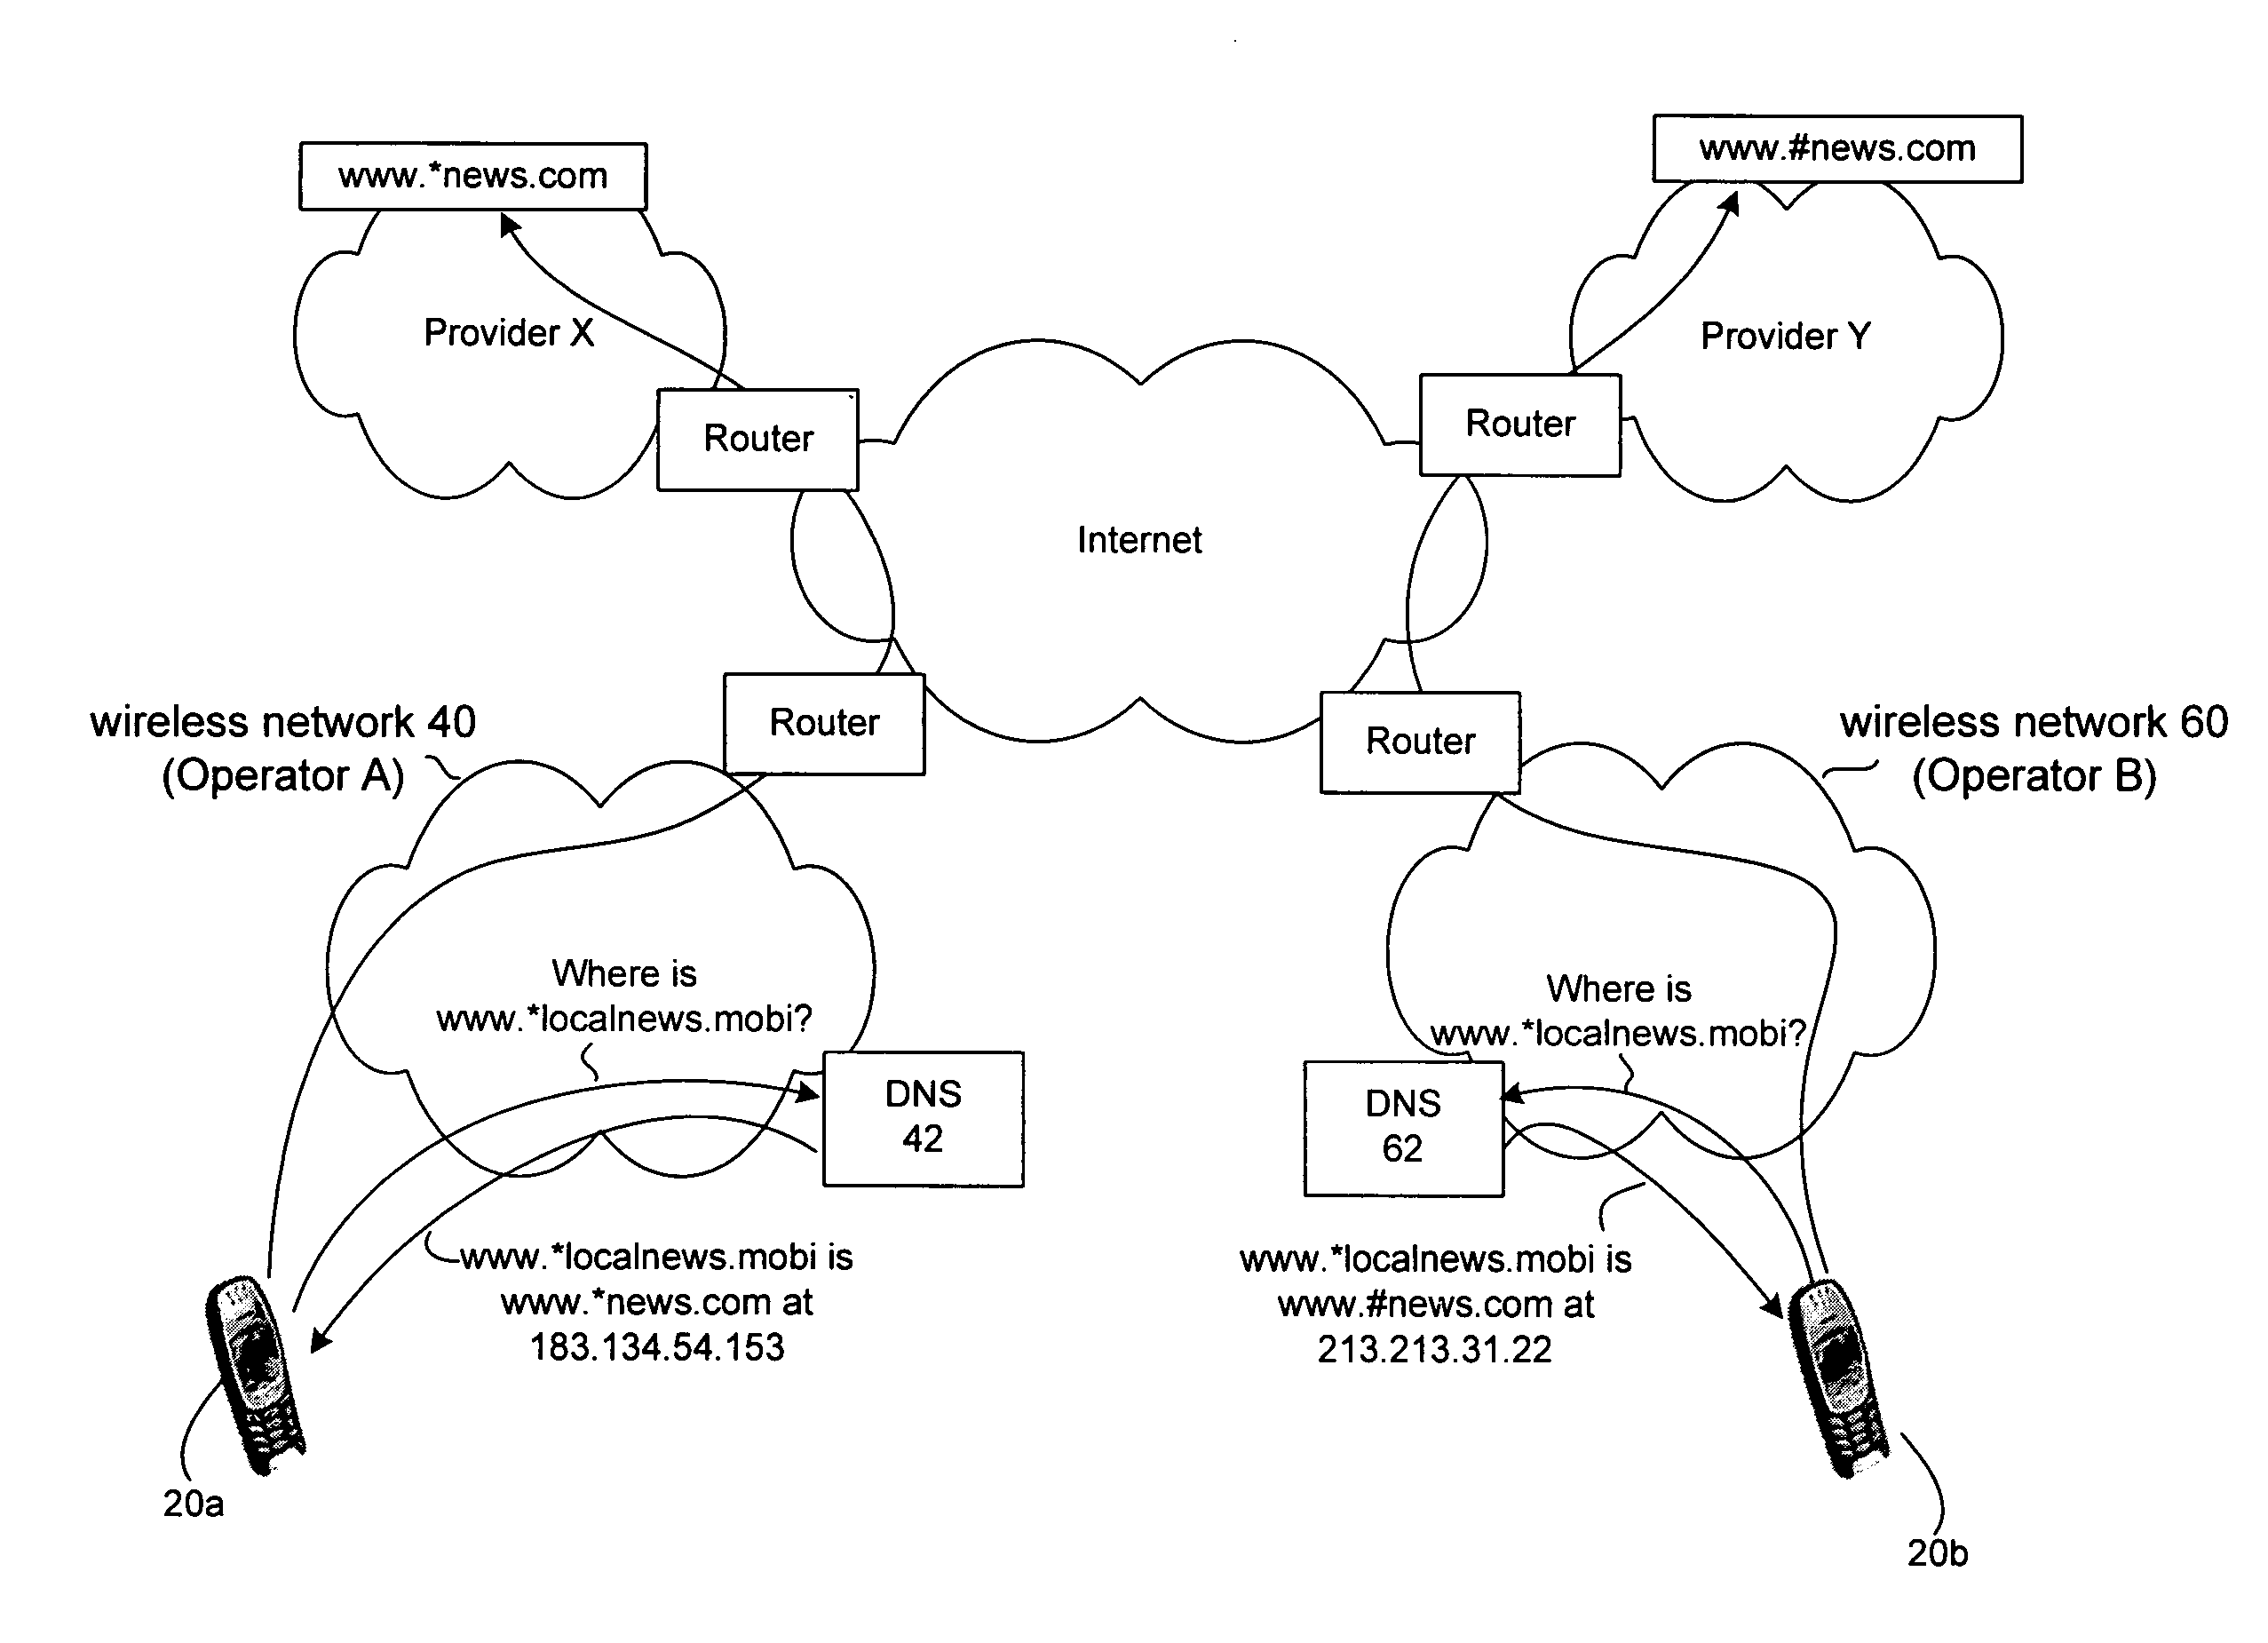 System and method for service naming and related directory structure in a mobile data network